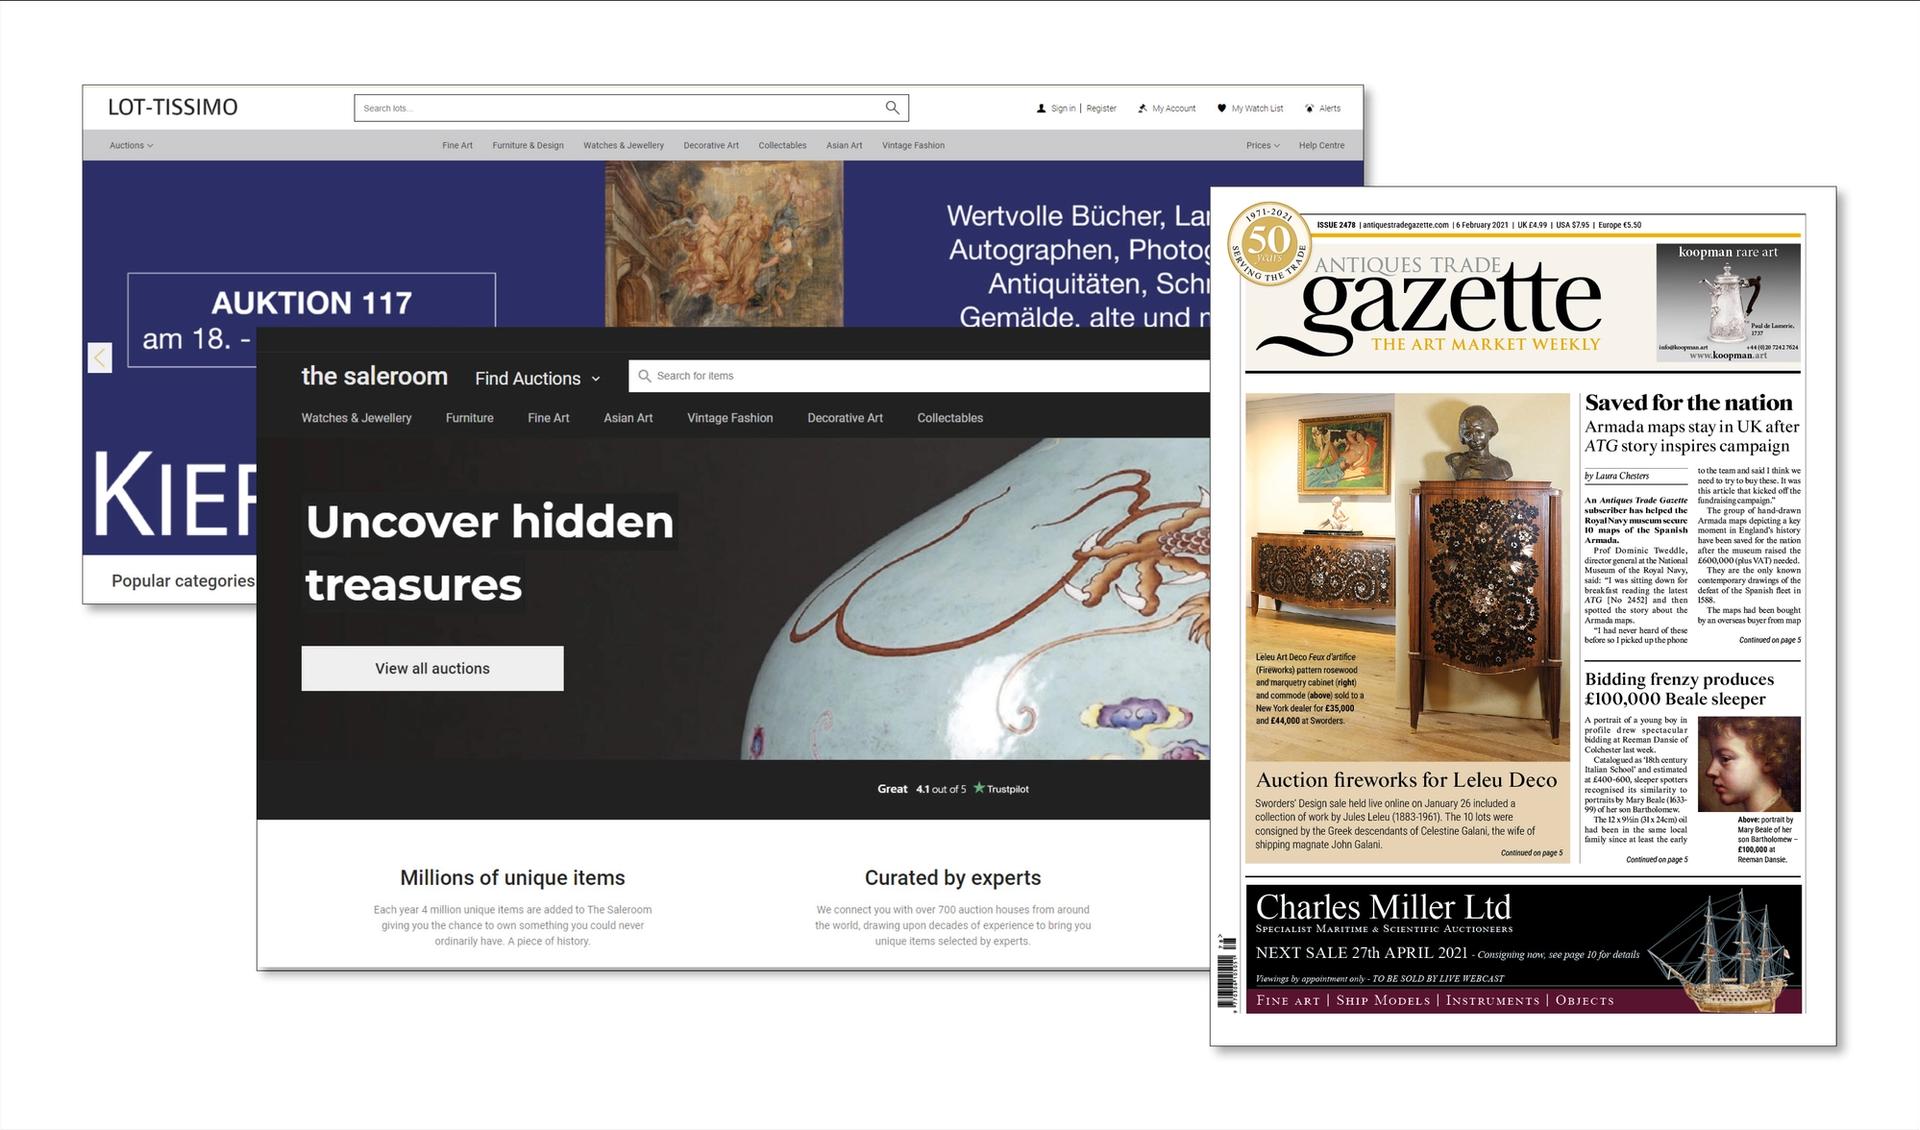 The Antiques Trade Gazette was started in 1971 and its parent organisation has now expanded into several online bidding platforms Courtesy of ATG